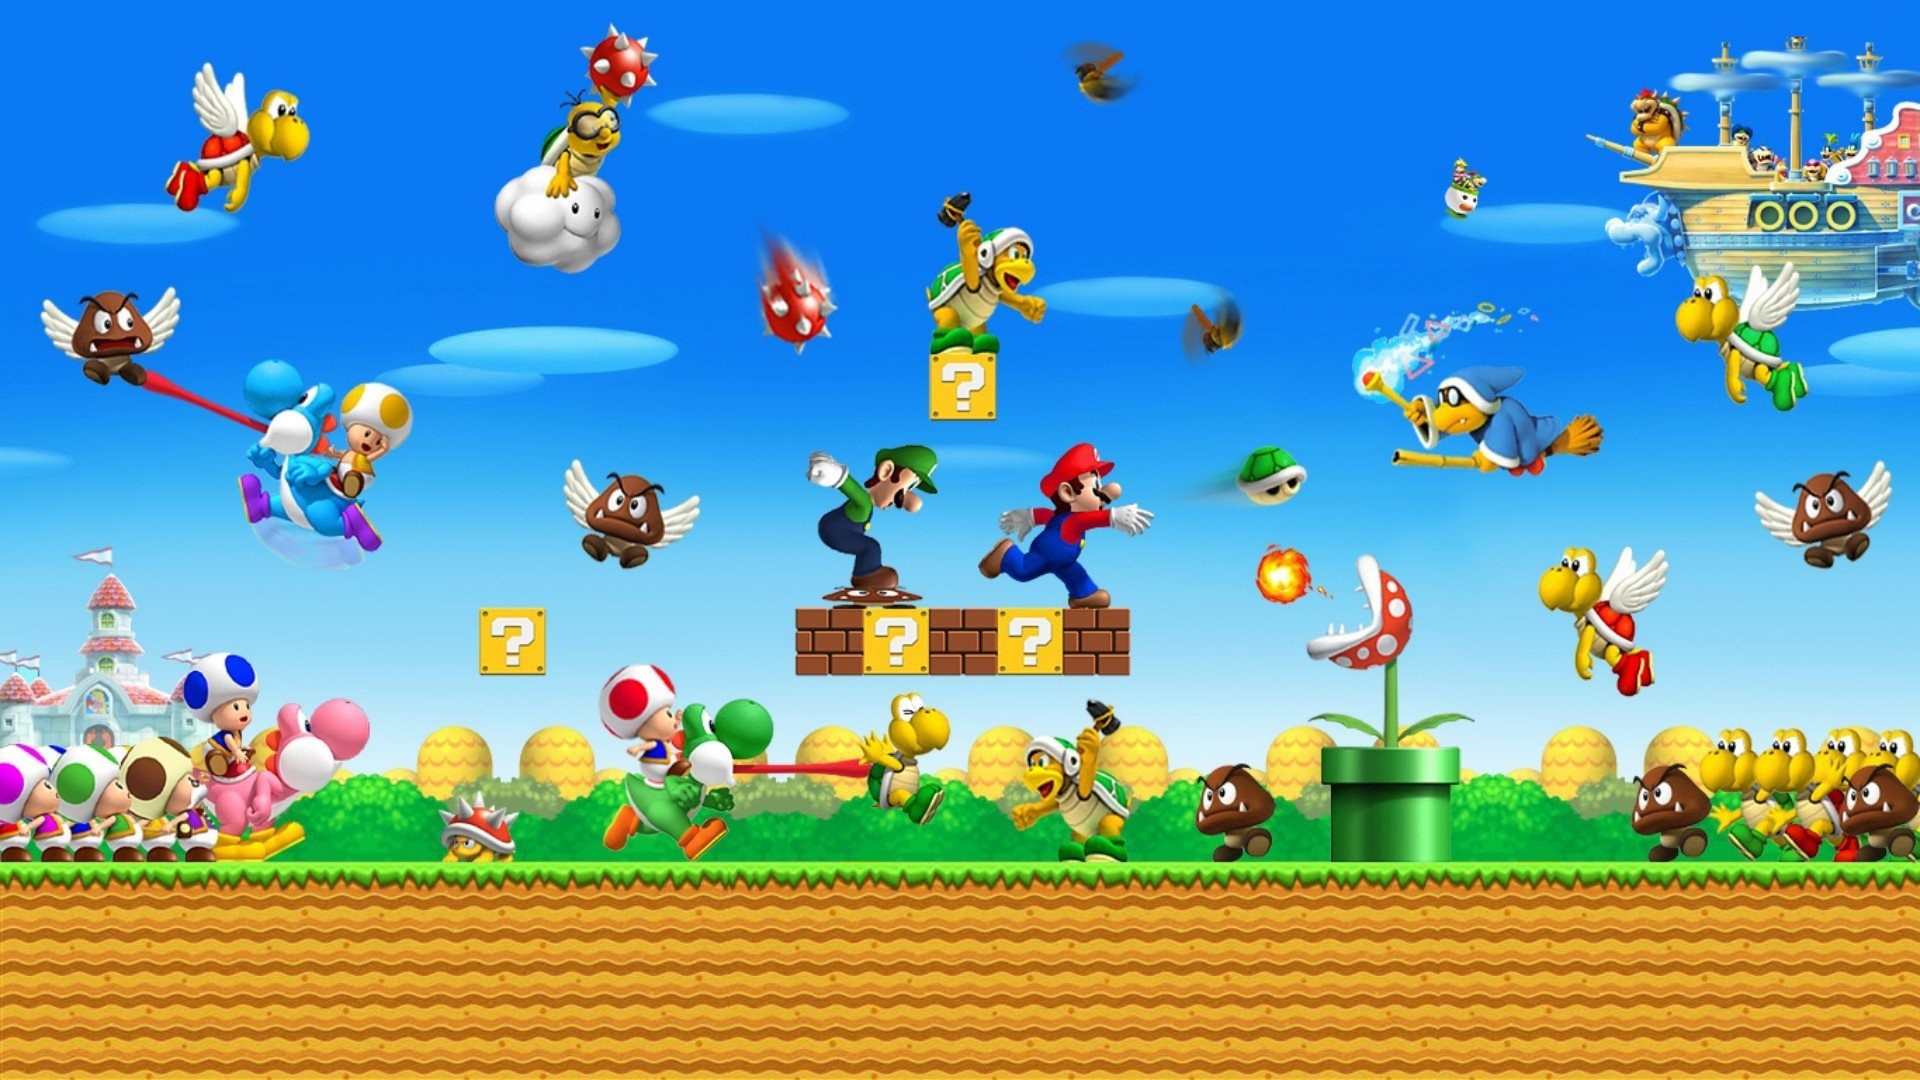 1920x1080 funny game super mario backgrounds full hd desktop images windows 10  backgrounds colourful computer wallpapers cool colours artwork 1920Ã1080  Wallpaper HD